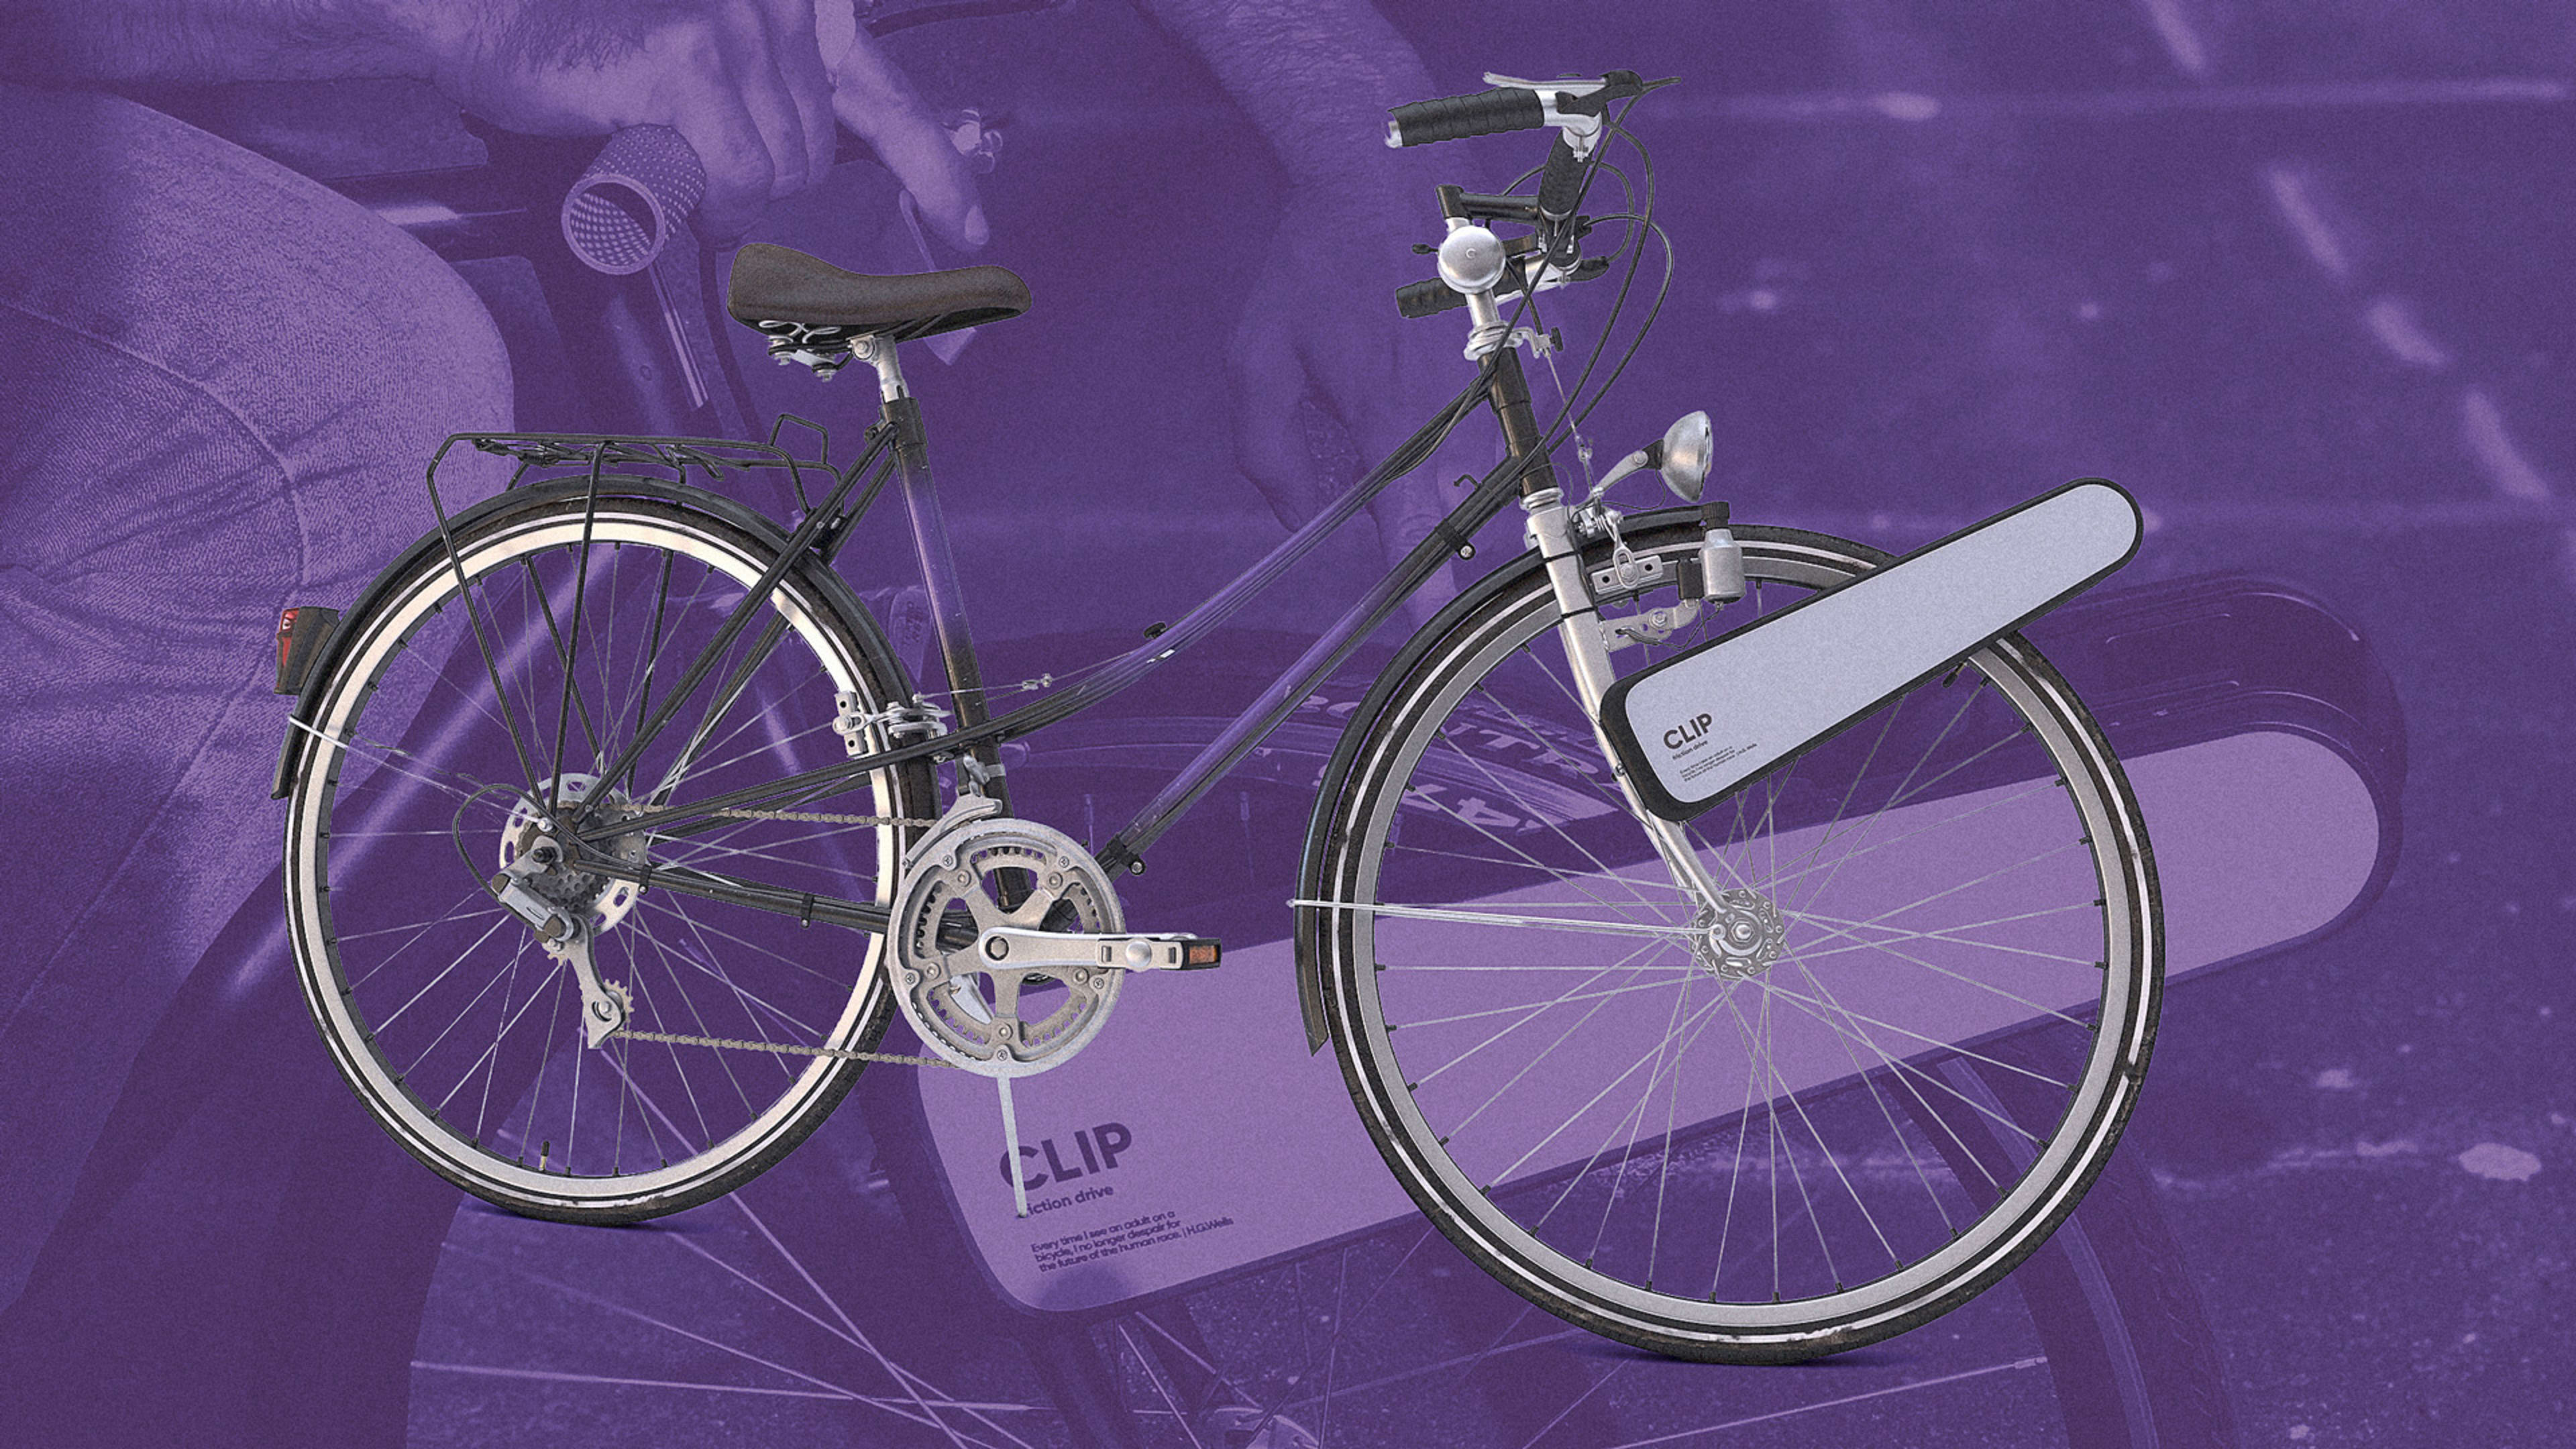 This clever attachment makes any bike an e-bike in just seconds